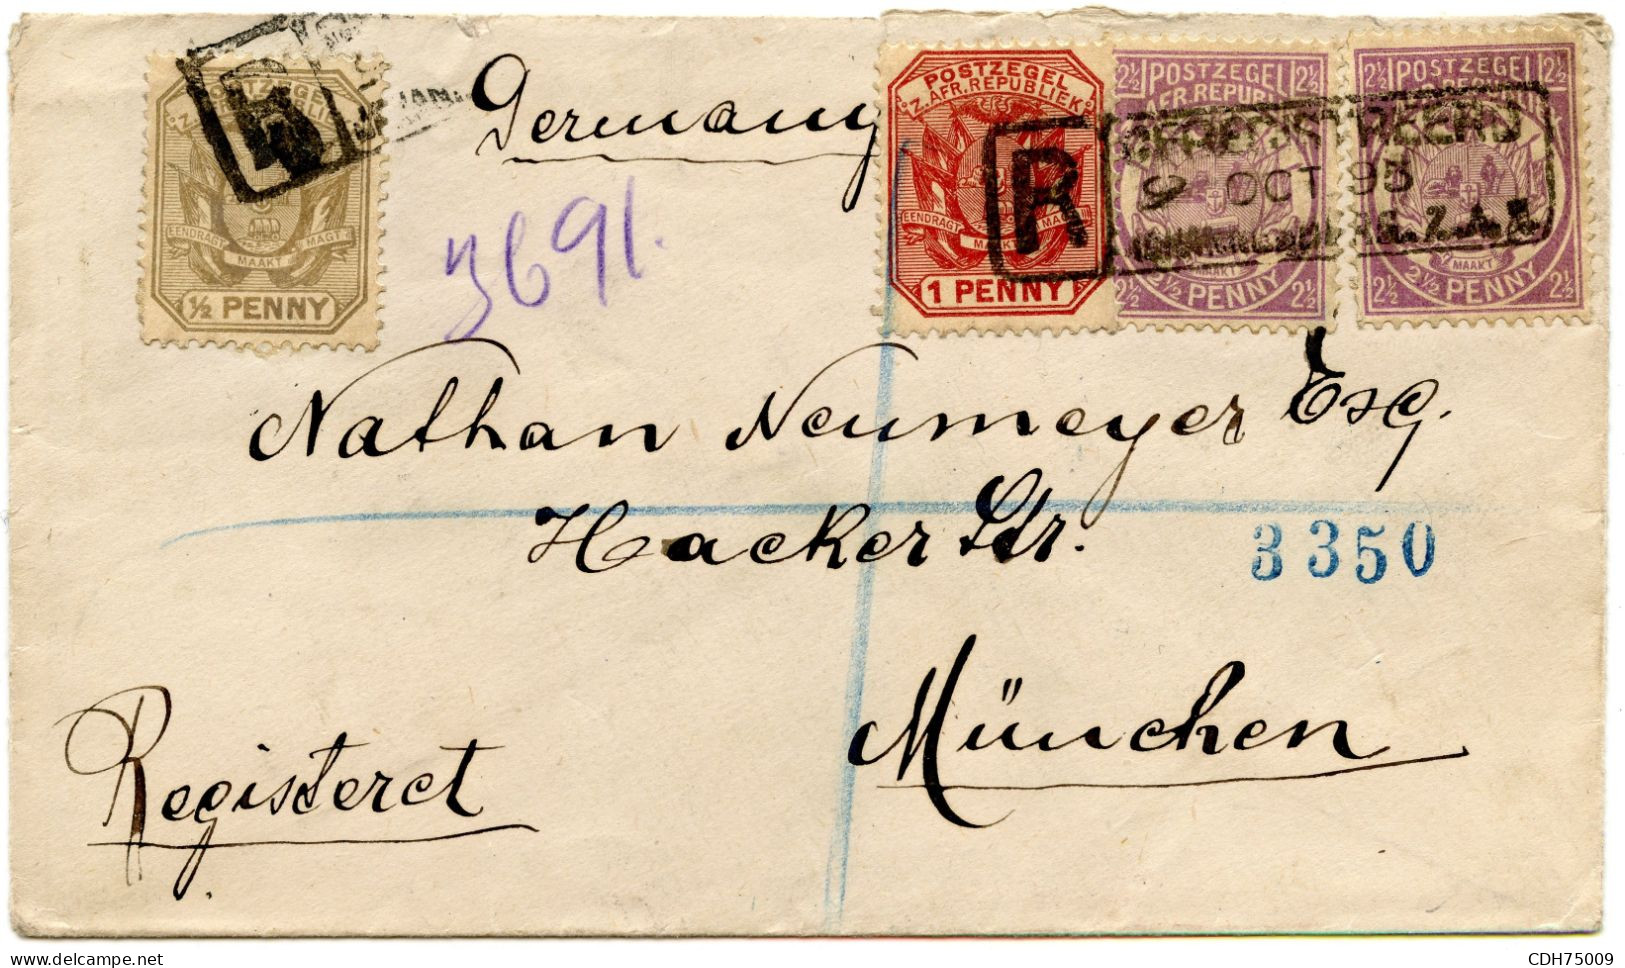 TRANSVAAL - LETTRE RECOMMANDEE POUR MUNICH, 1895 - Transvaal (1870-1909)